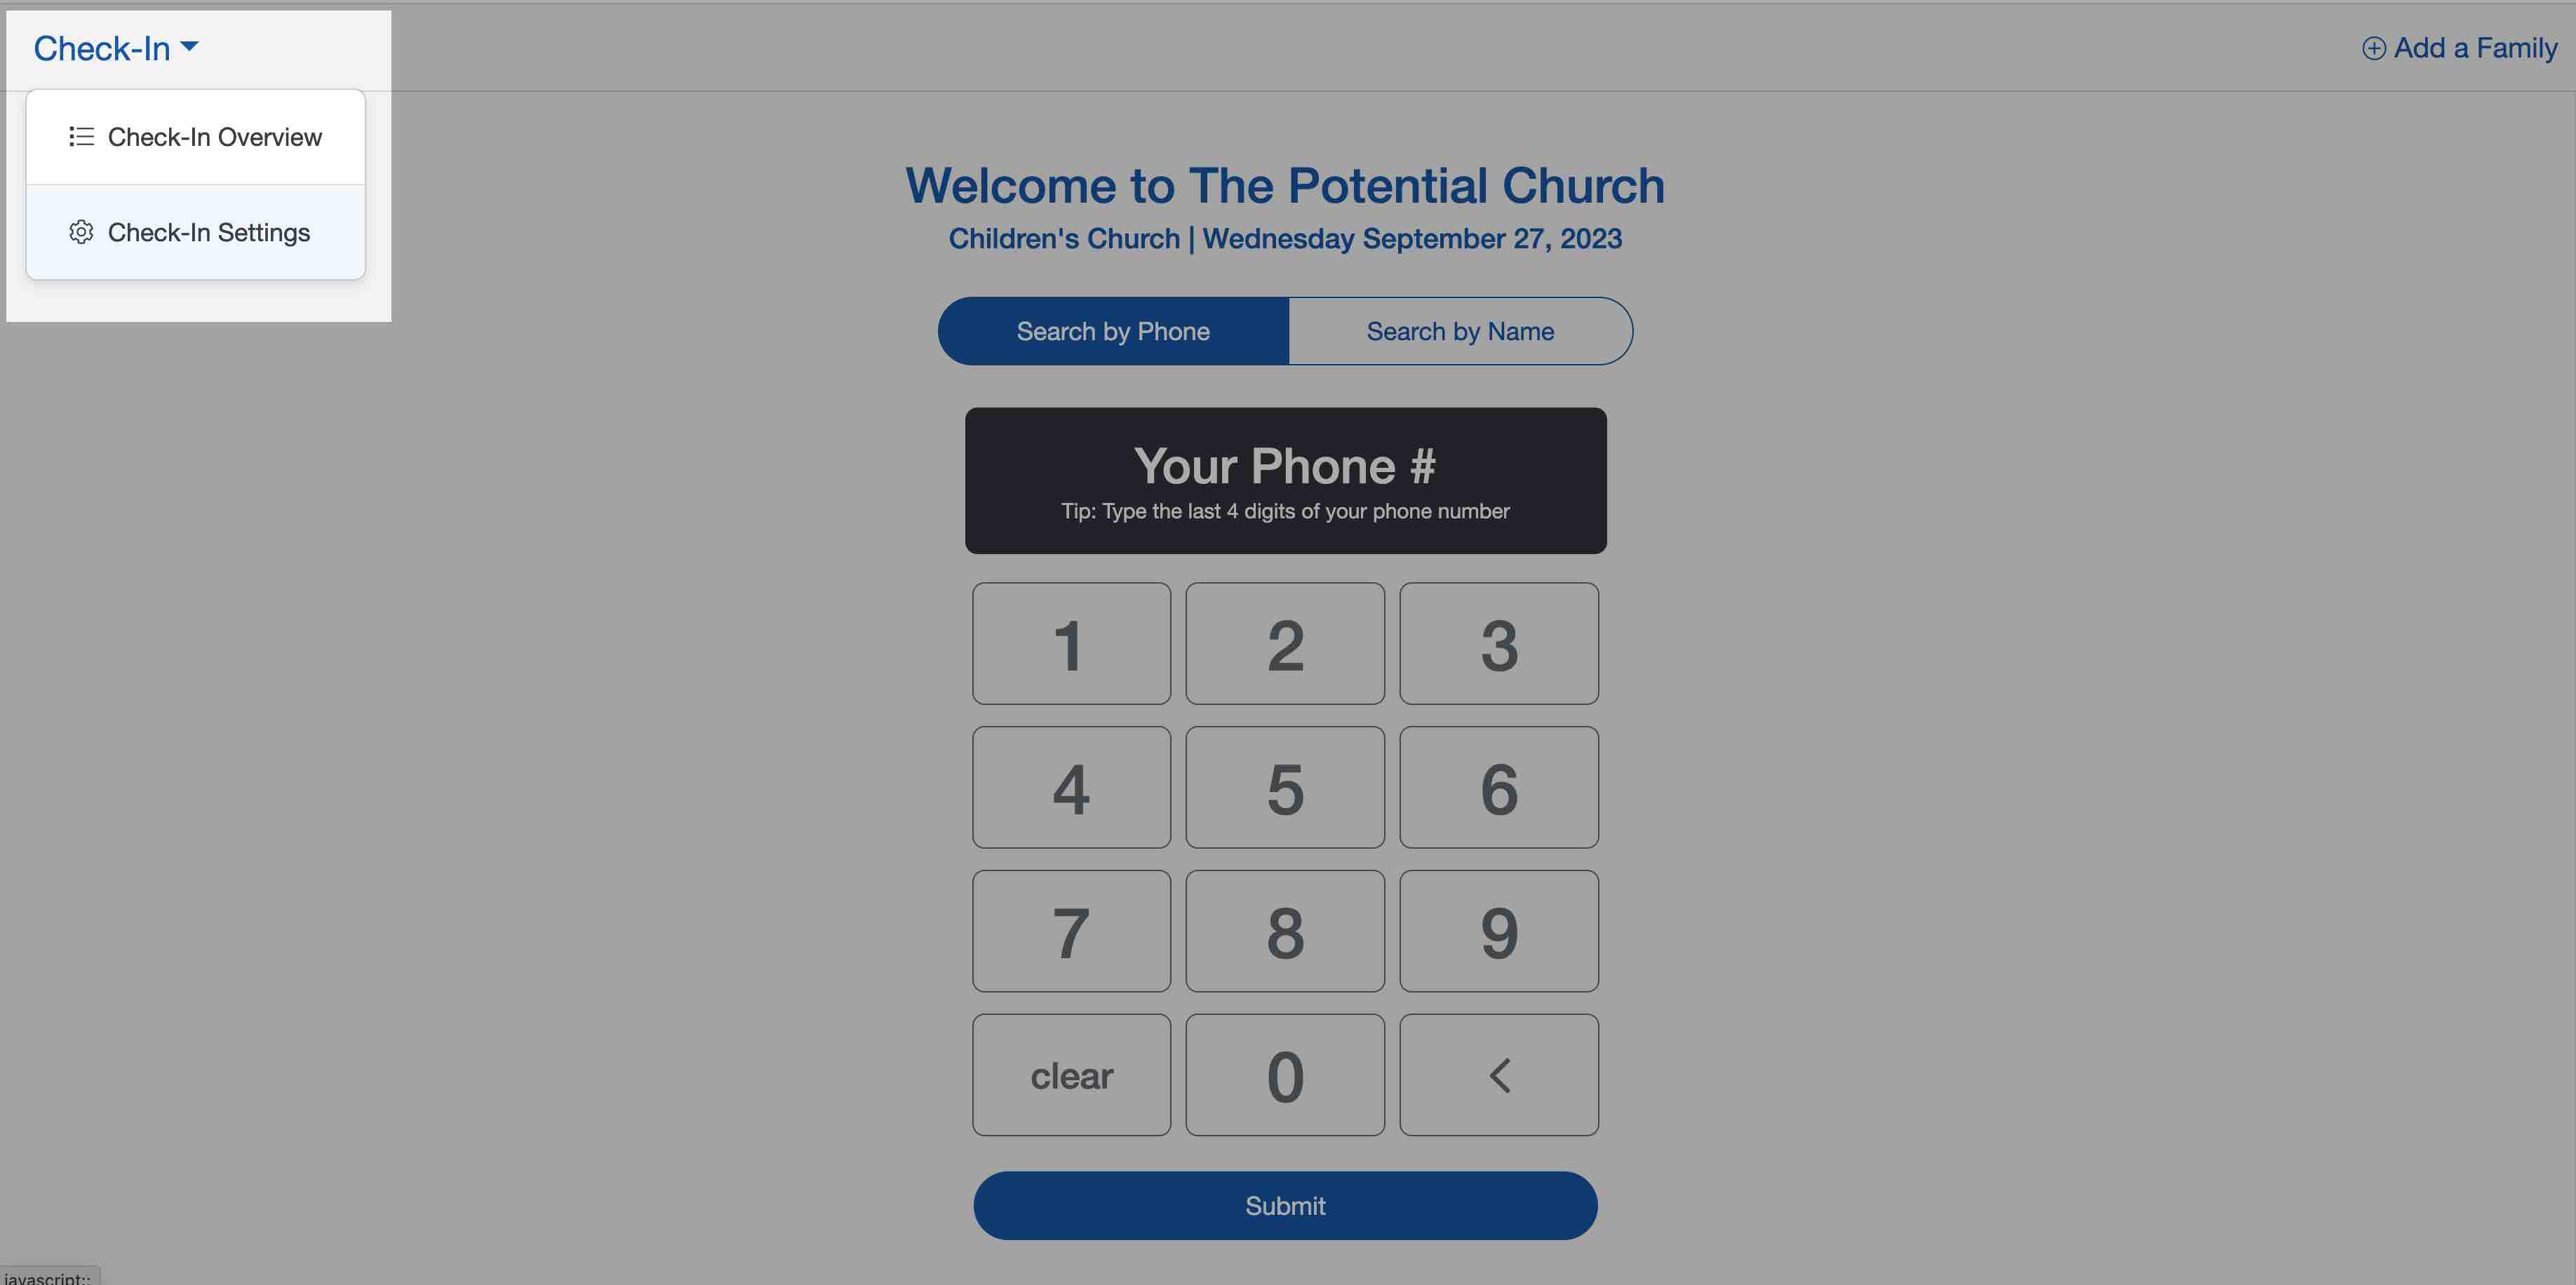 How to access the check in settings menu in the family check in screen